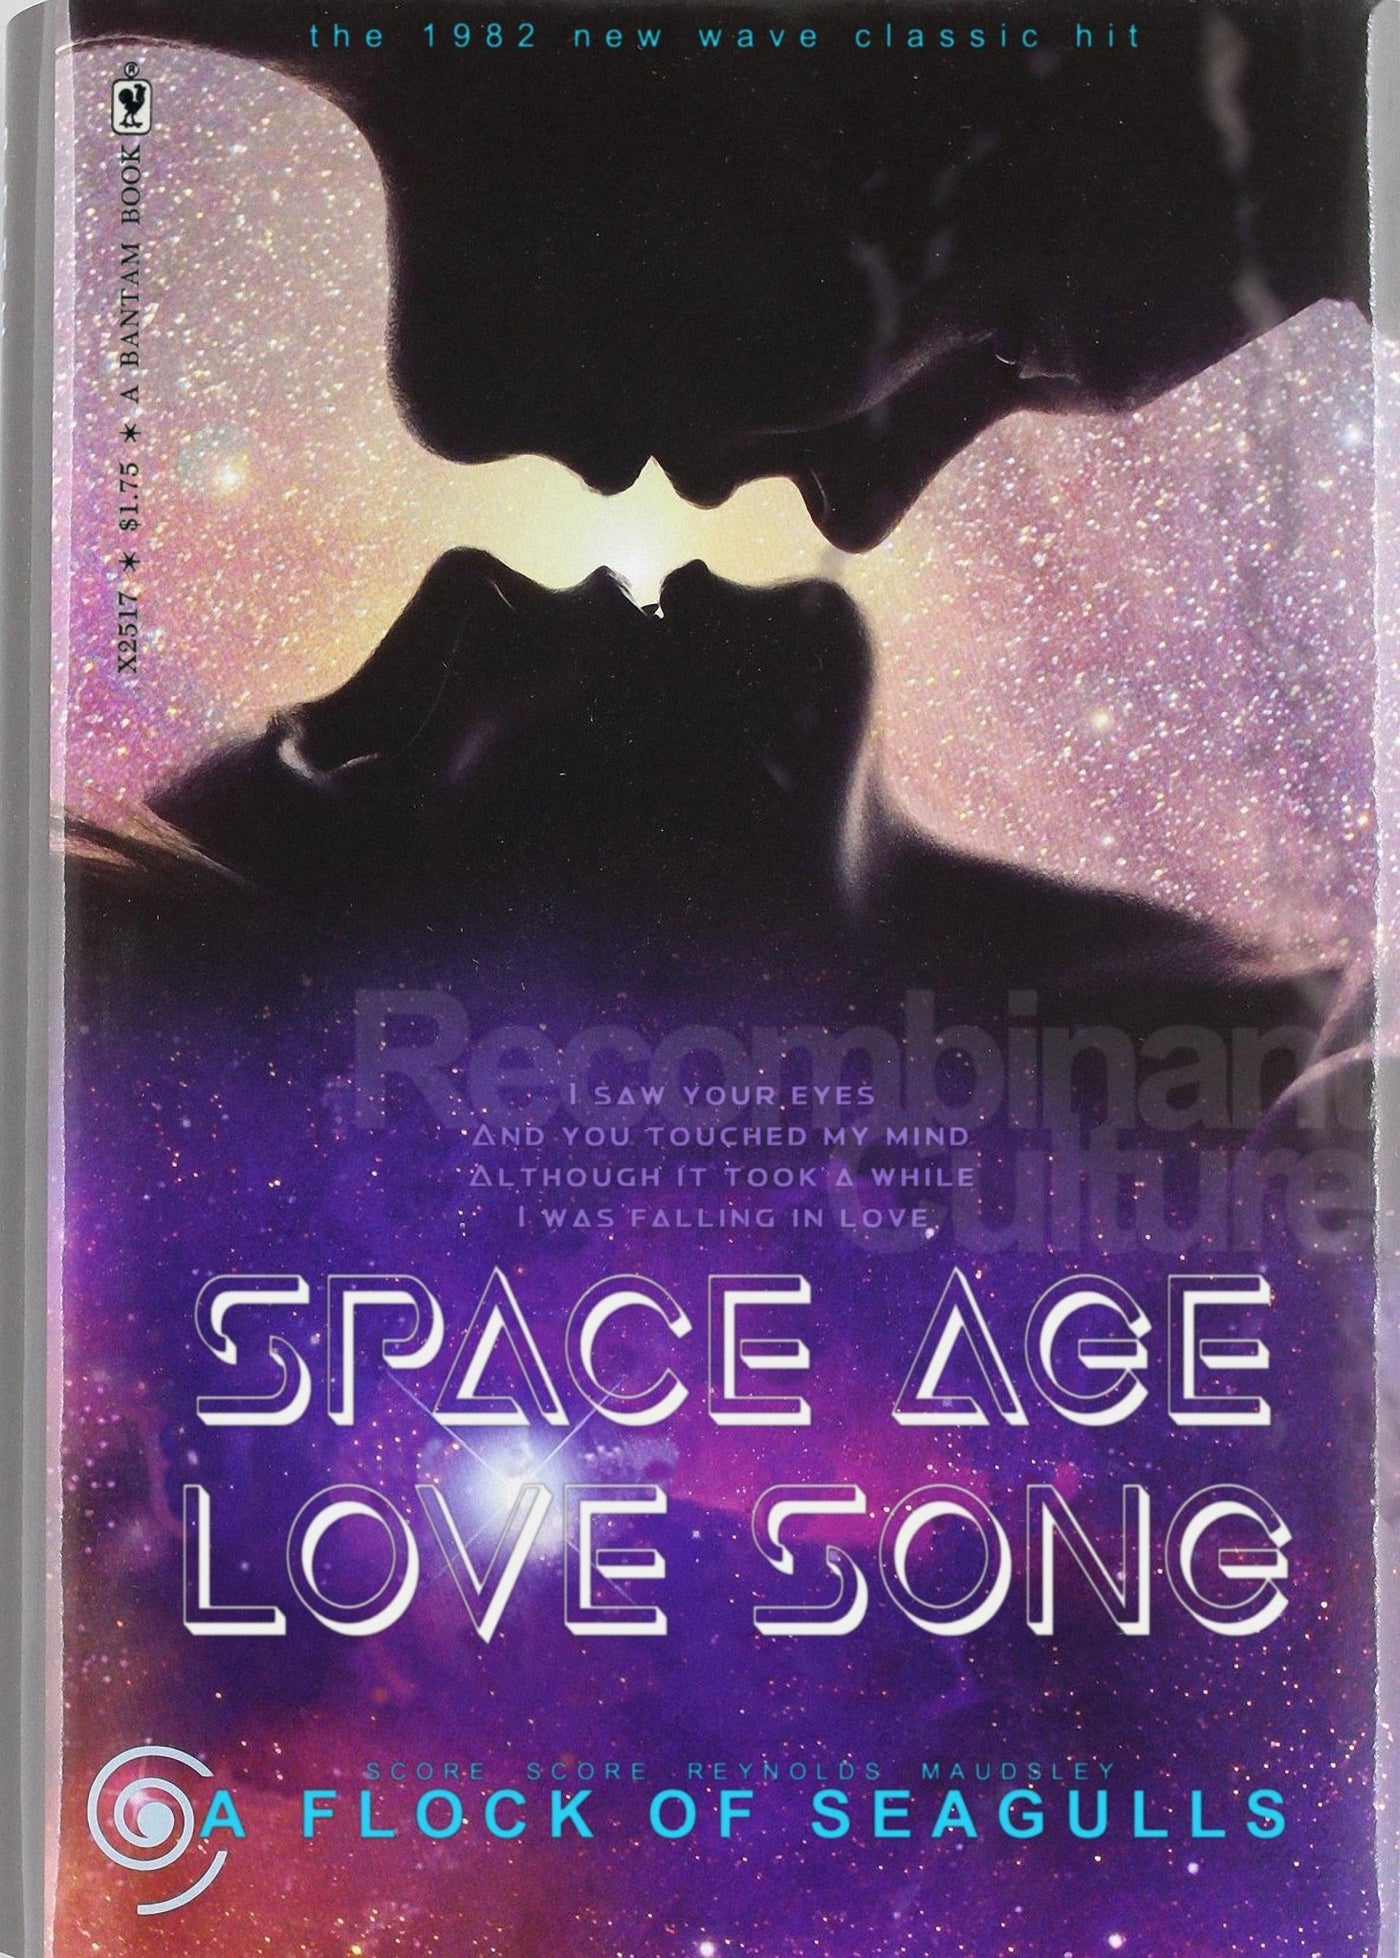 A Flock of Seagulls 'Space Age Love Song' v2 Art Print - RecombinantCulture